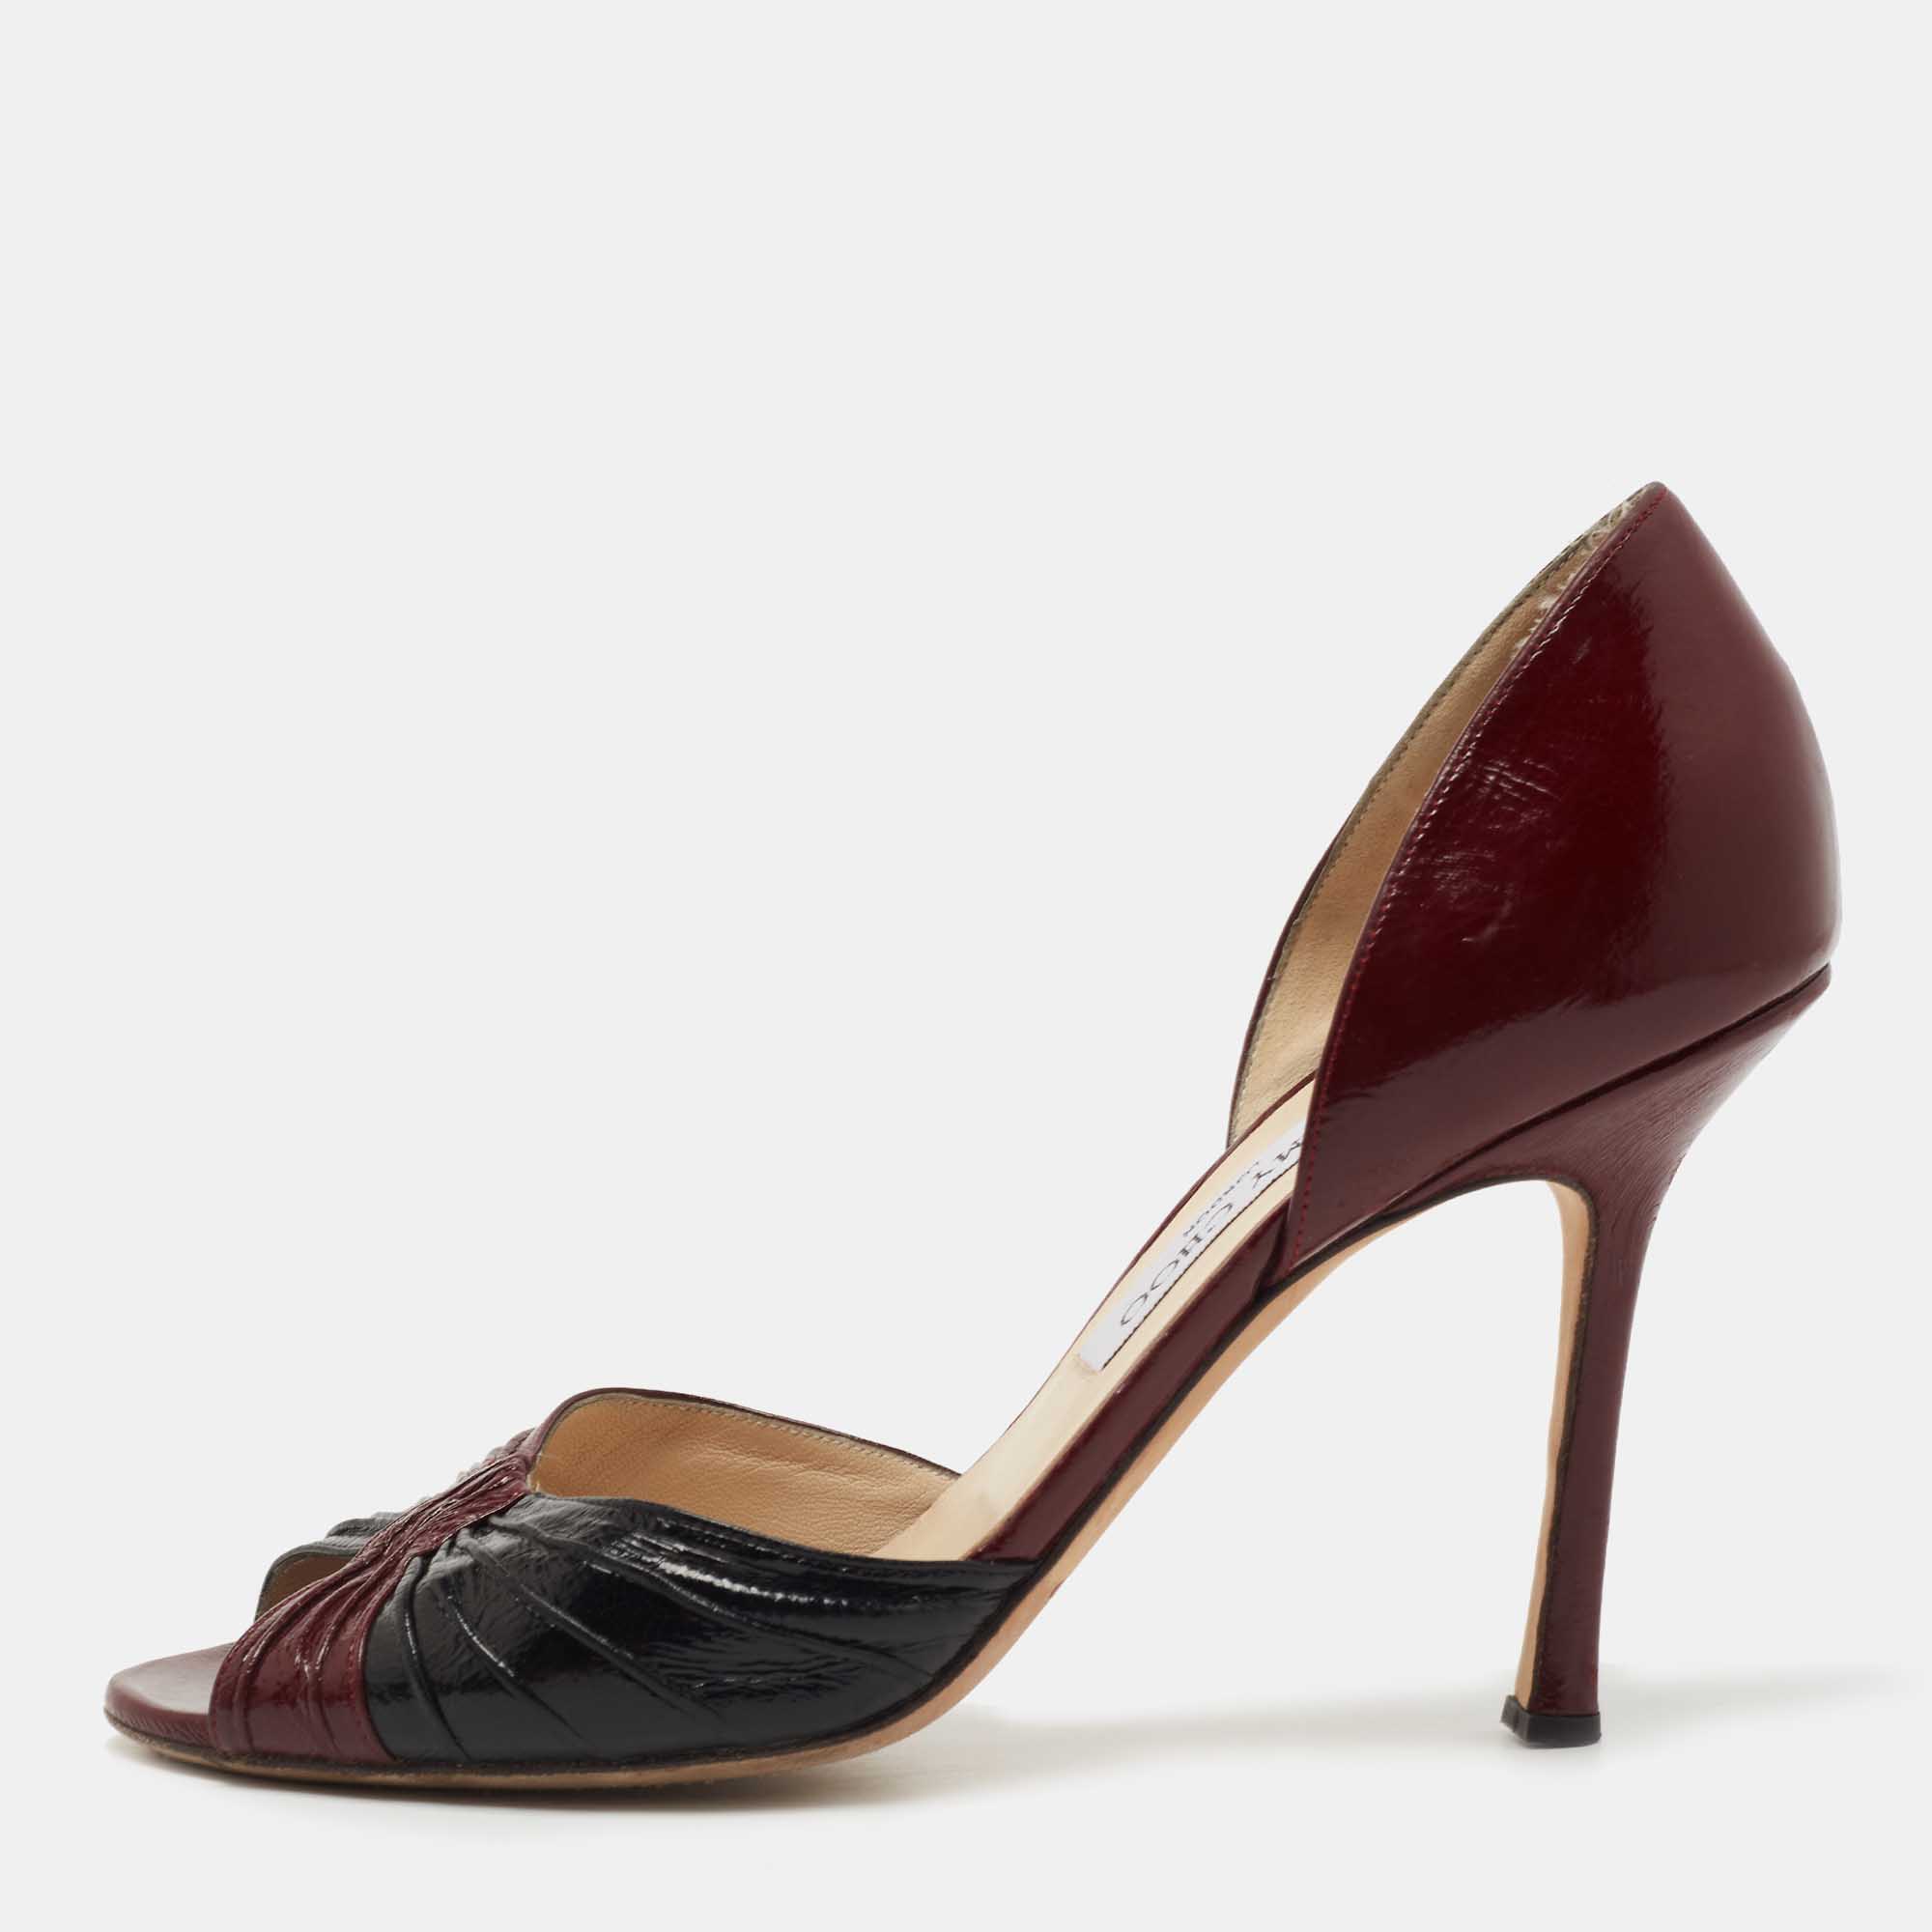 Pre-owned Jimmy Choo Burgundy/black Eel Leather Open Toe D'osary Pumps Size 39.5